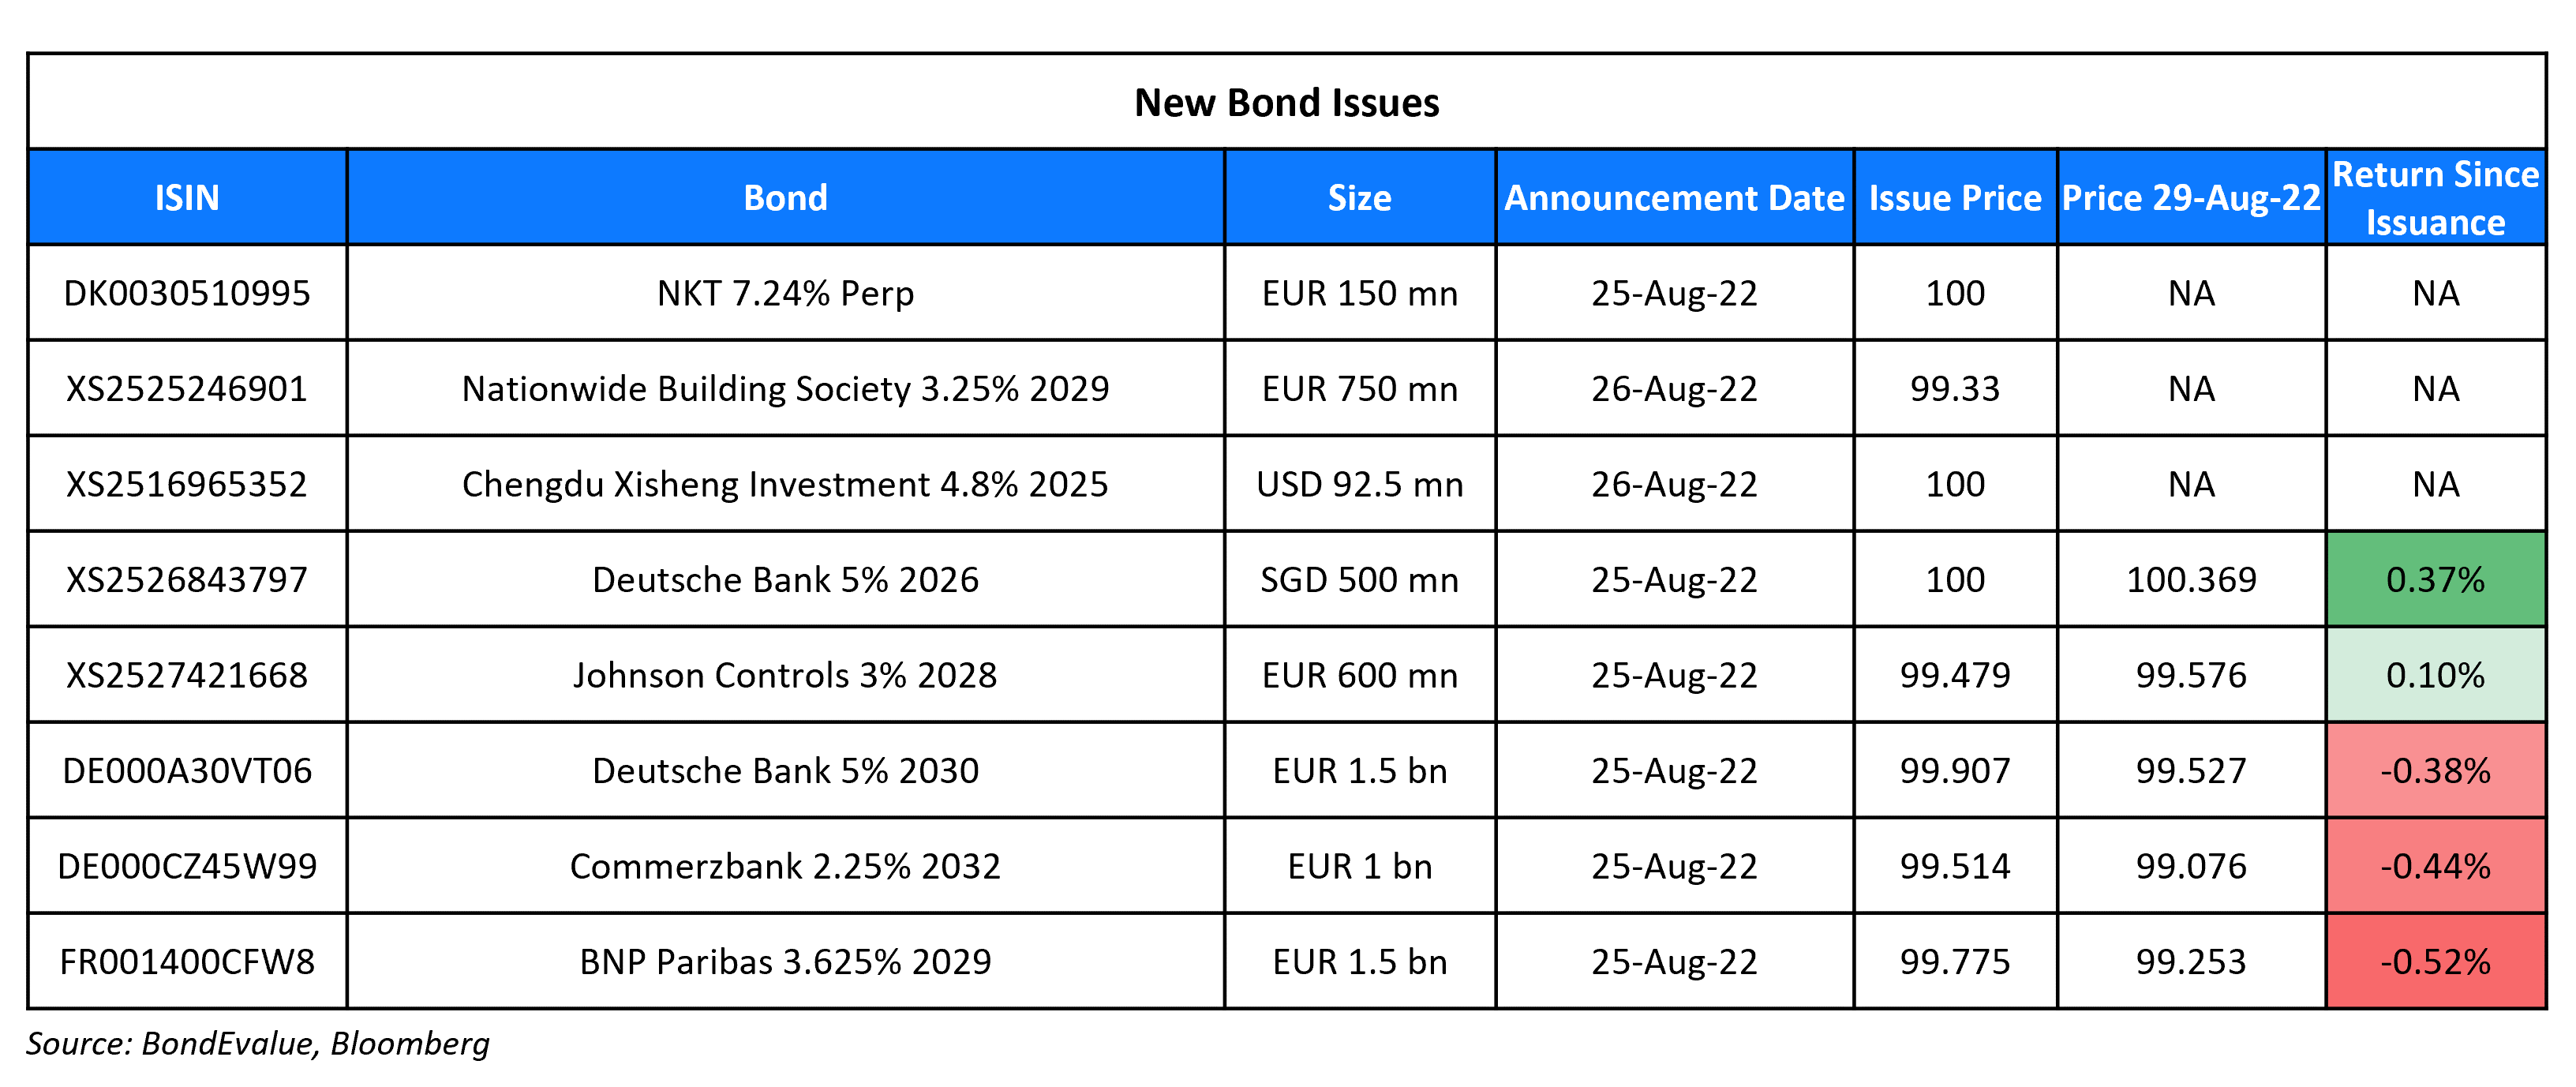 New Bond Issues 29 Aug 22